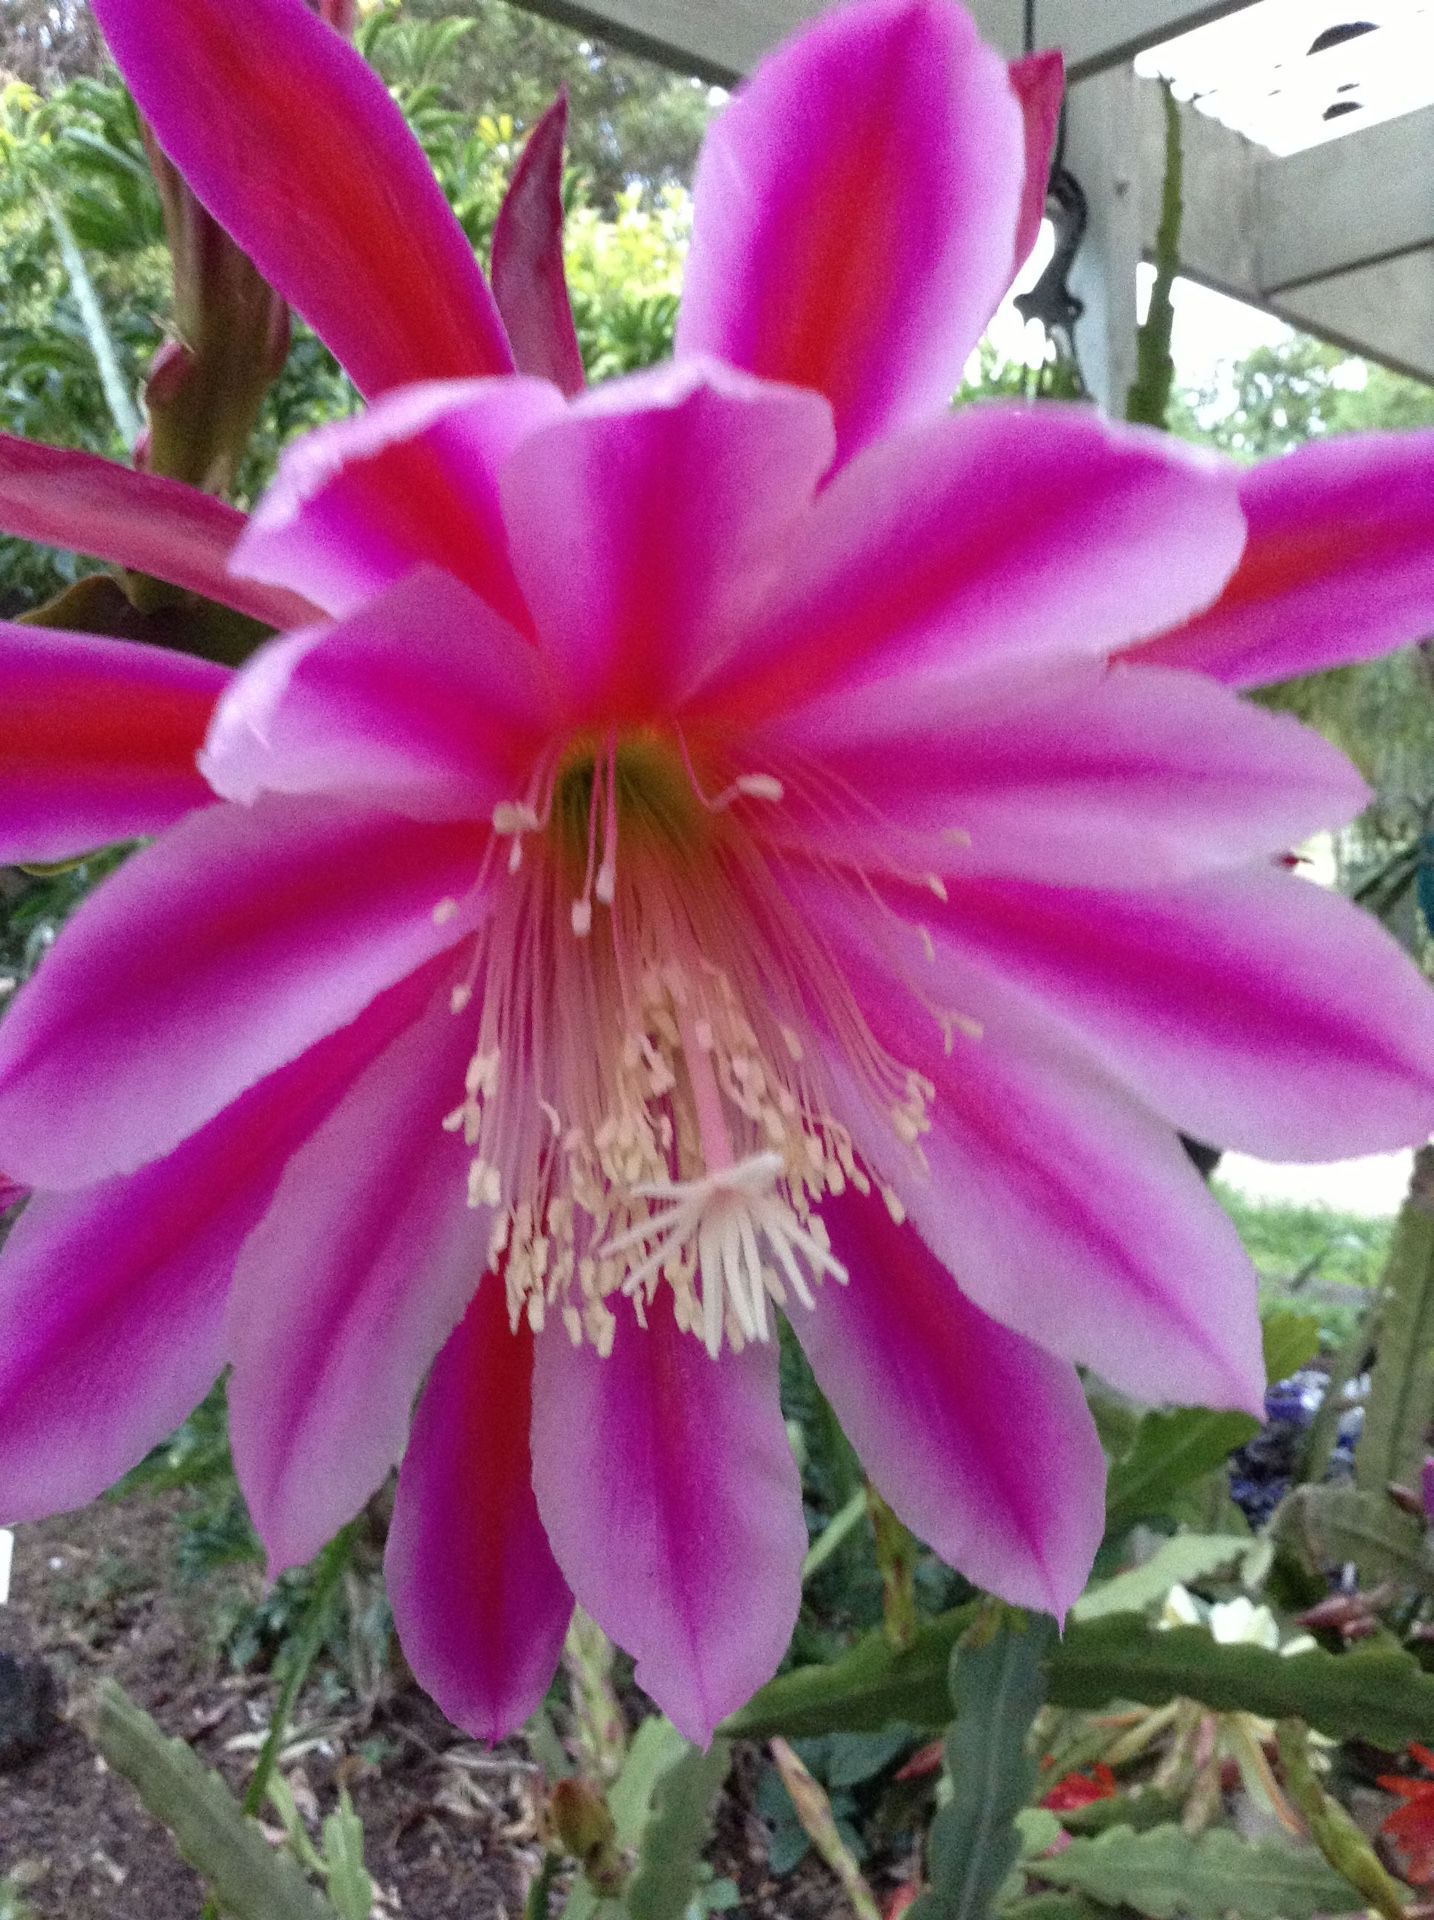 Giant Two Color Epiphyllum!  10” Basket / Hoa Quynh Tim’ / Orchid Cactus